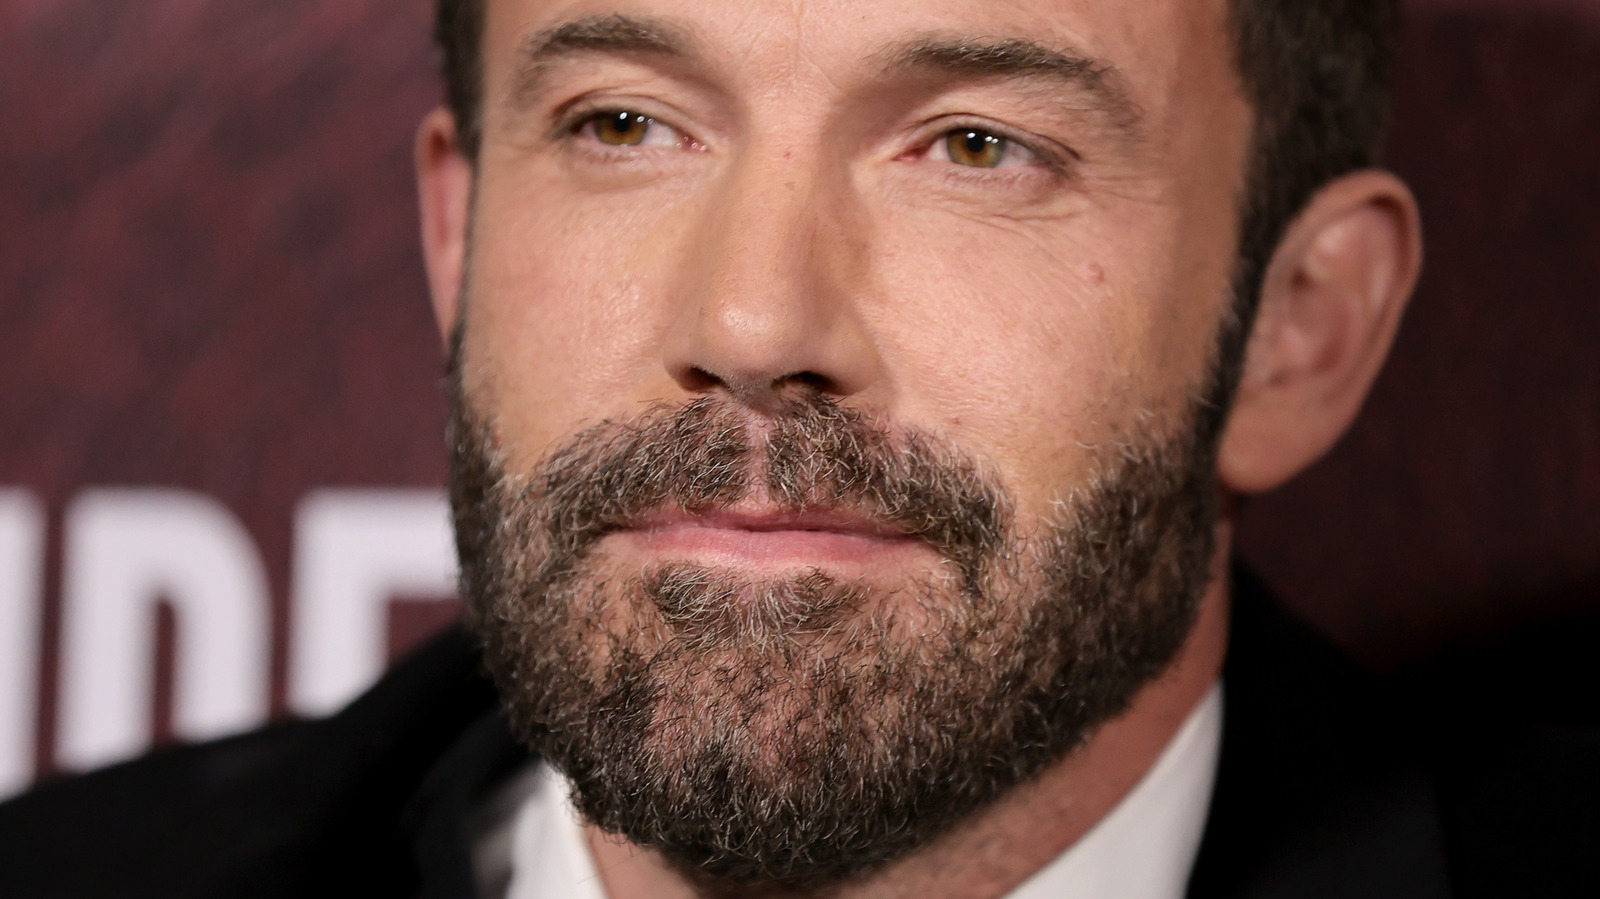 ben affleck chalks up his gloomy grammys appearance to banter with jennifer lopez